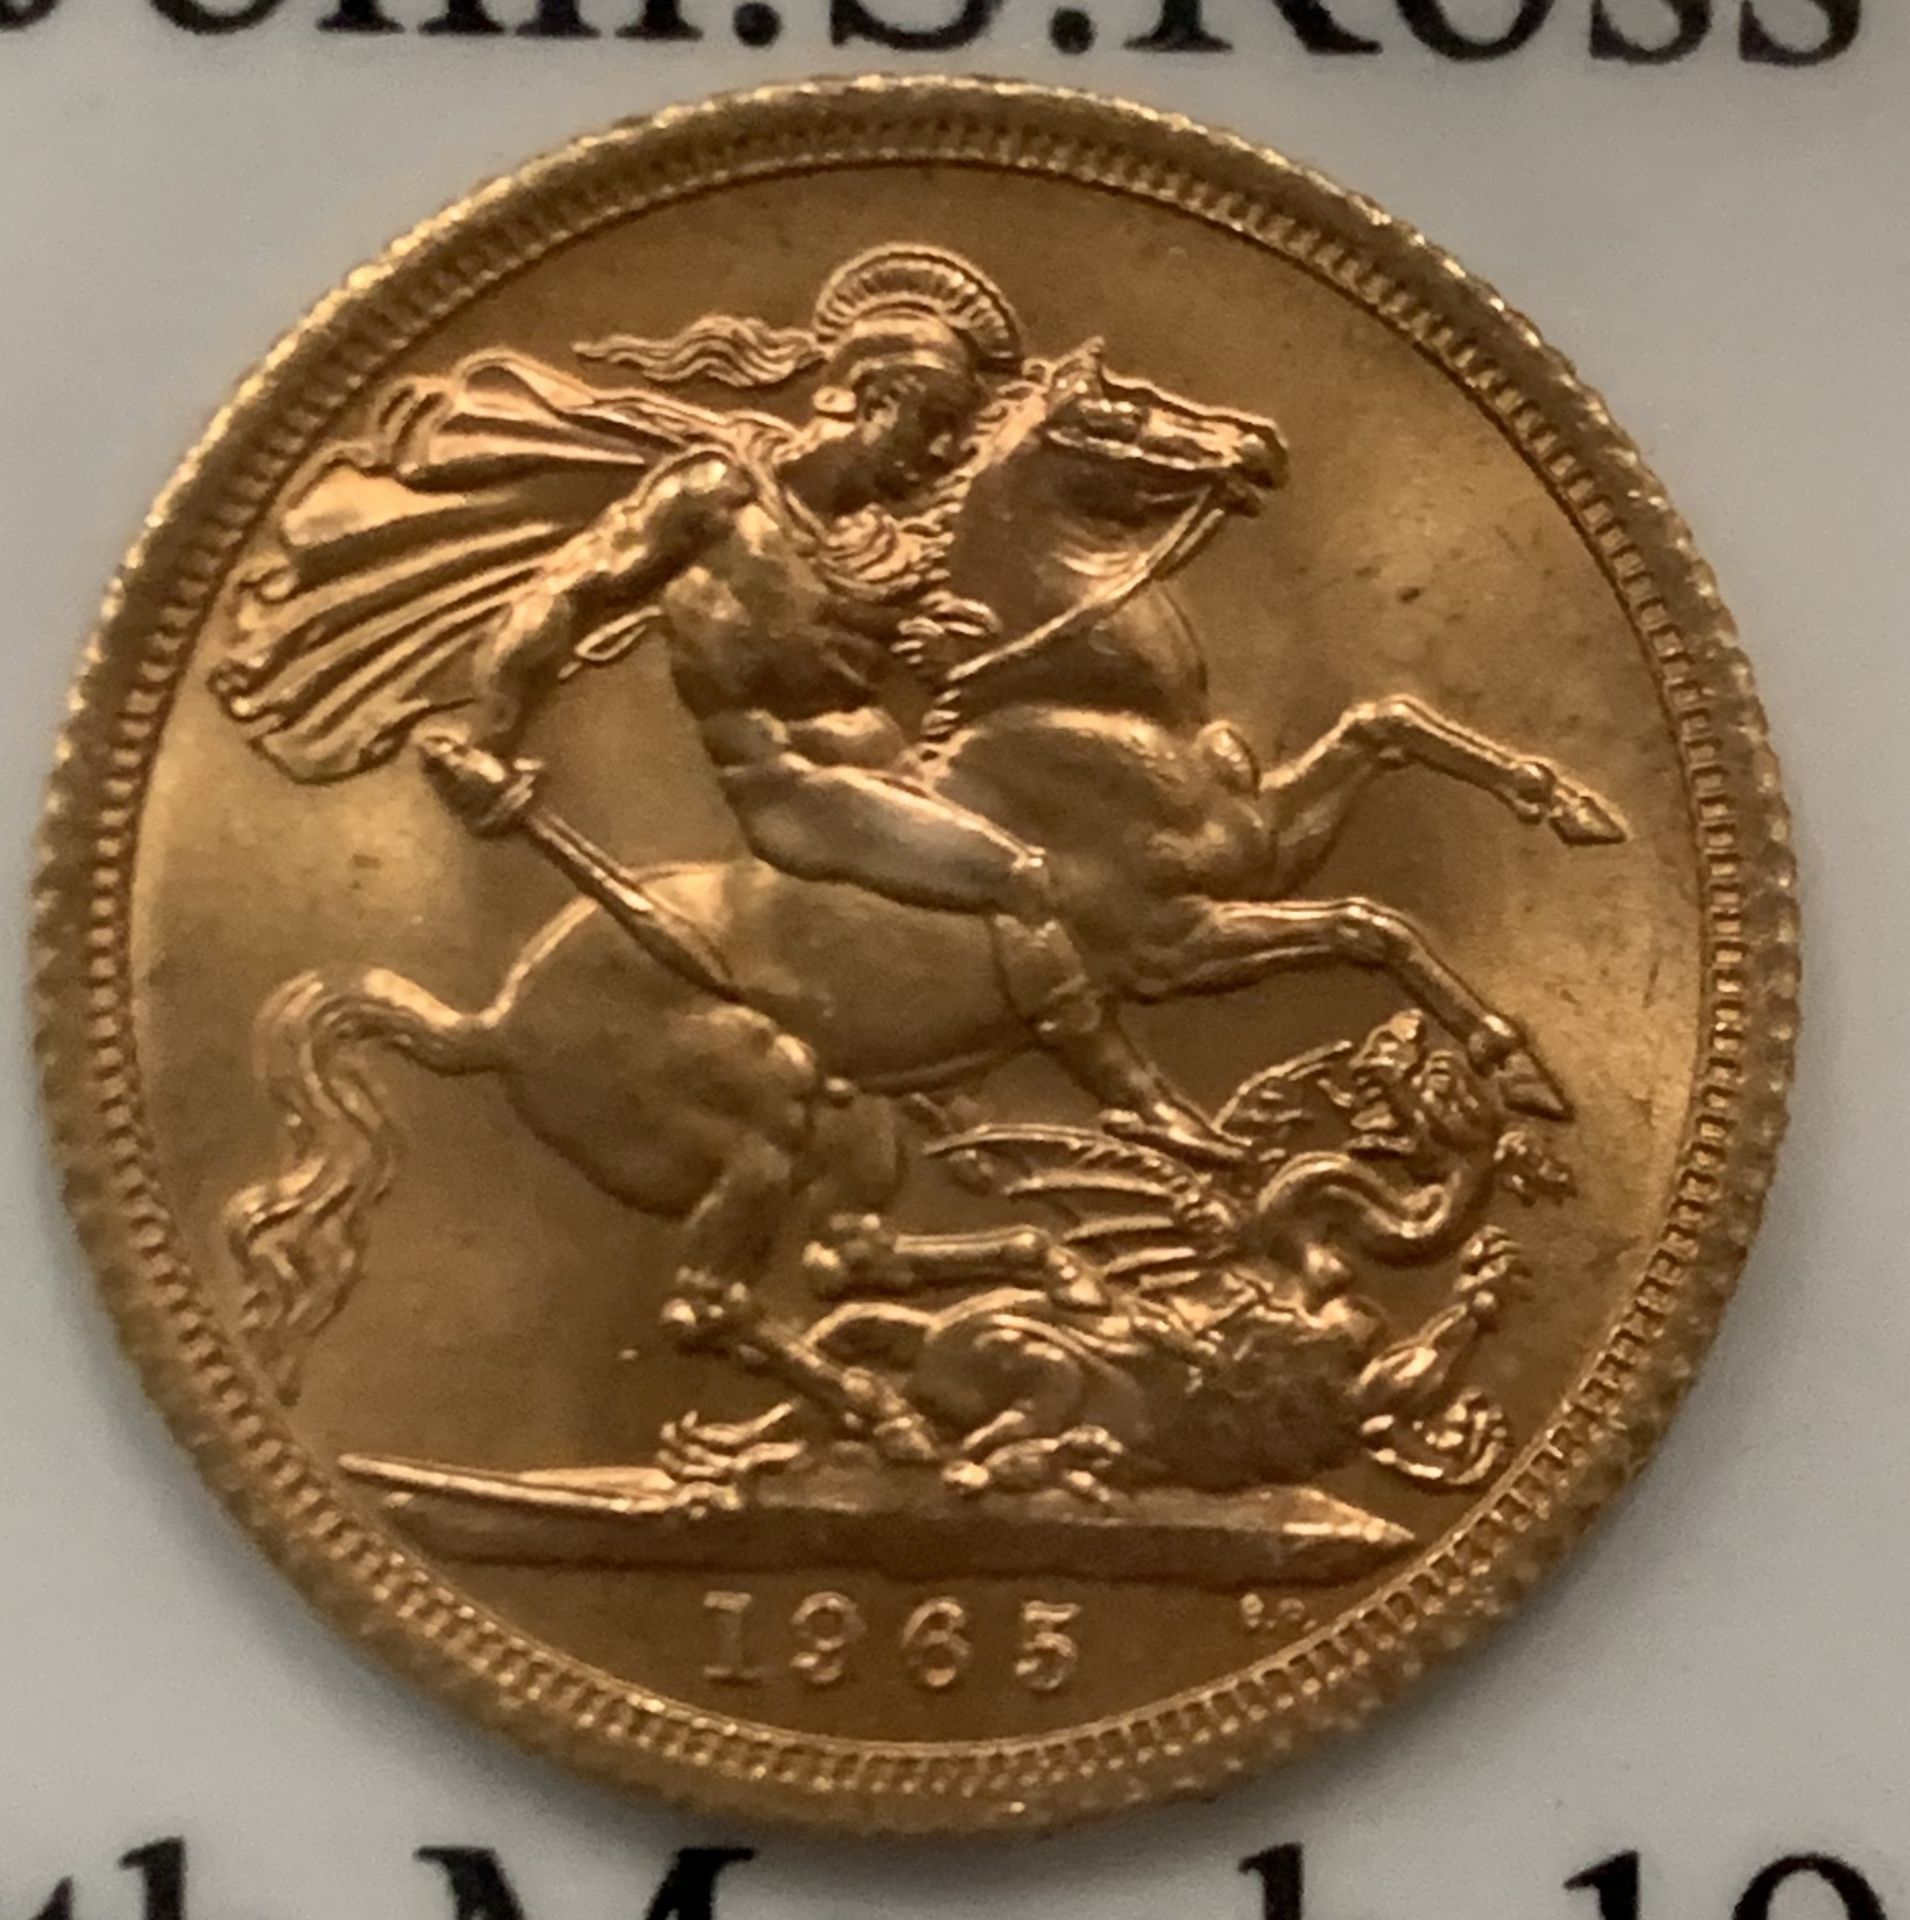 A 1965 gold sovereign mounted in a presentation frame - Image 2 of 2